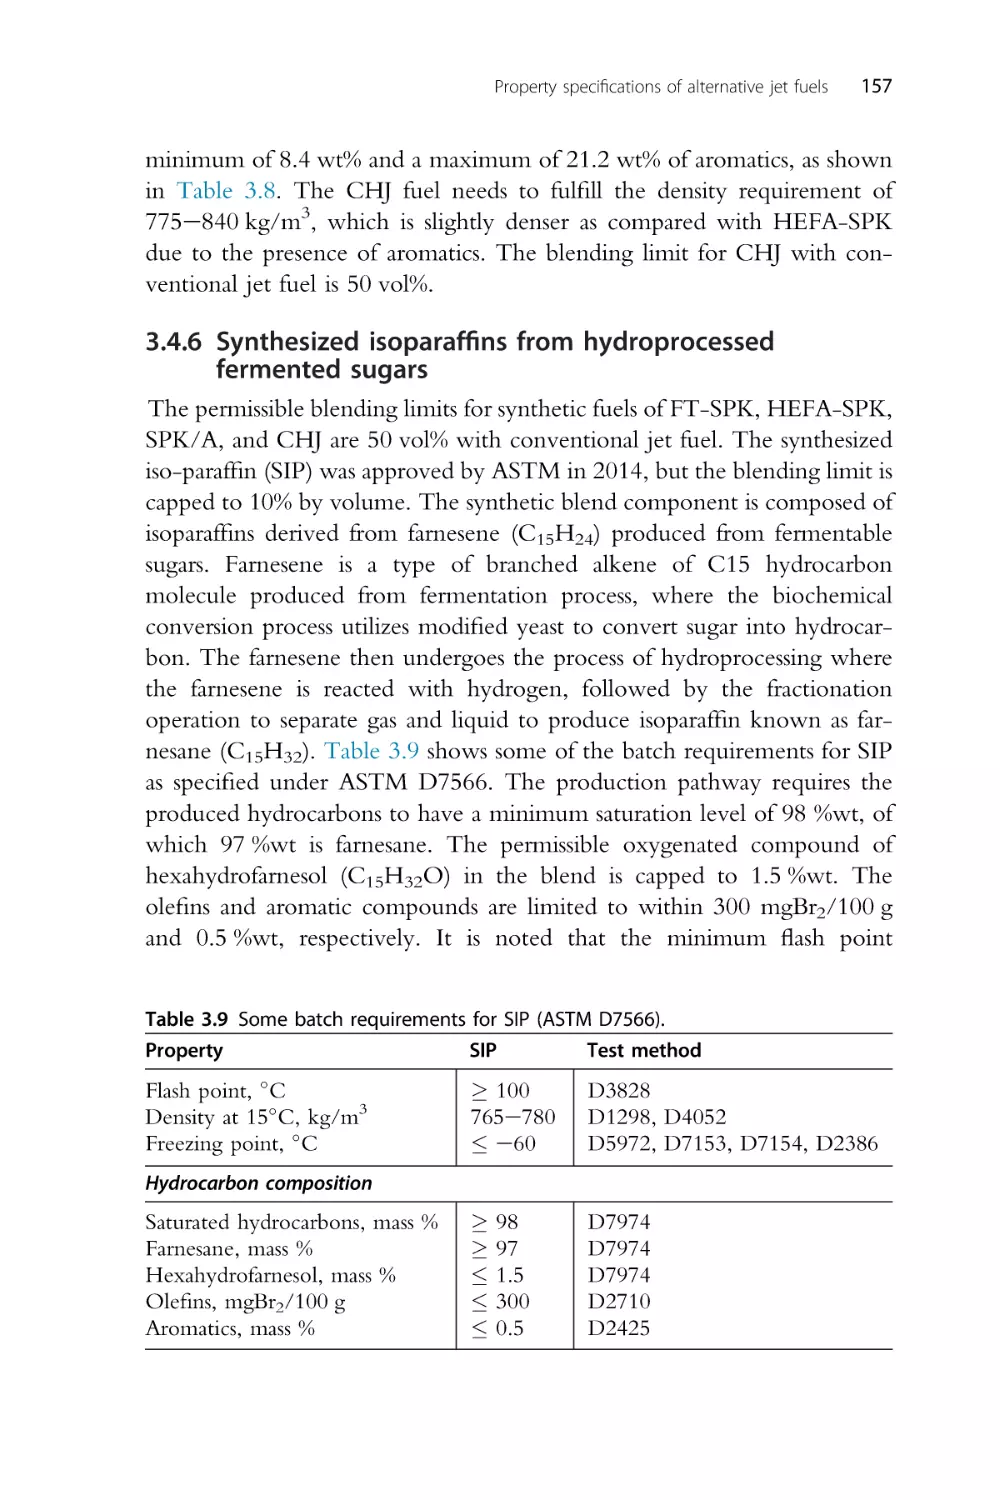 3.4.6 Synthesized isoparaffins from hydroprocessed fermented sugars